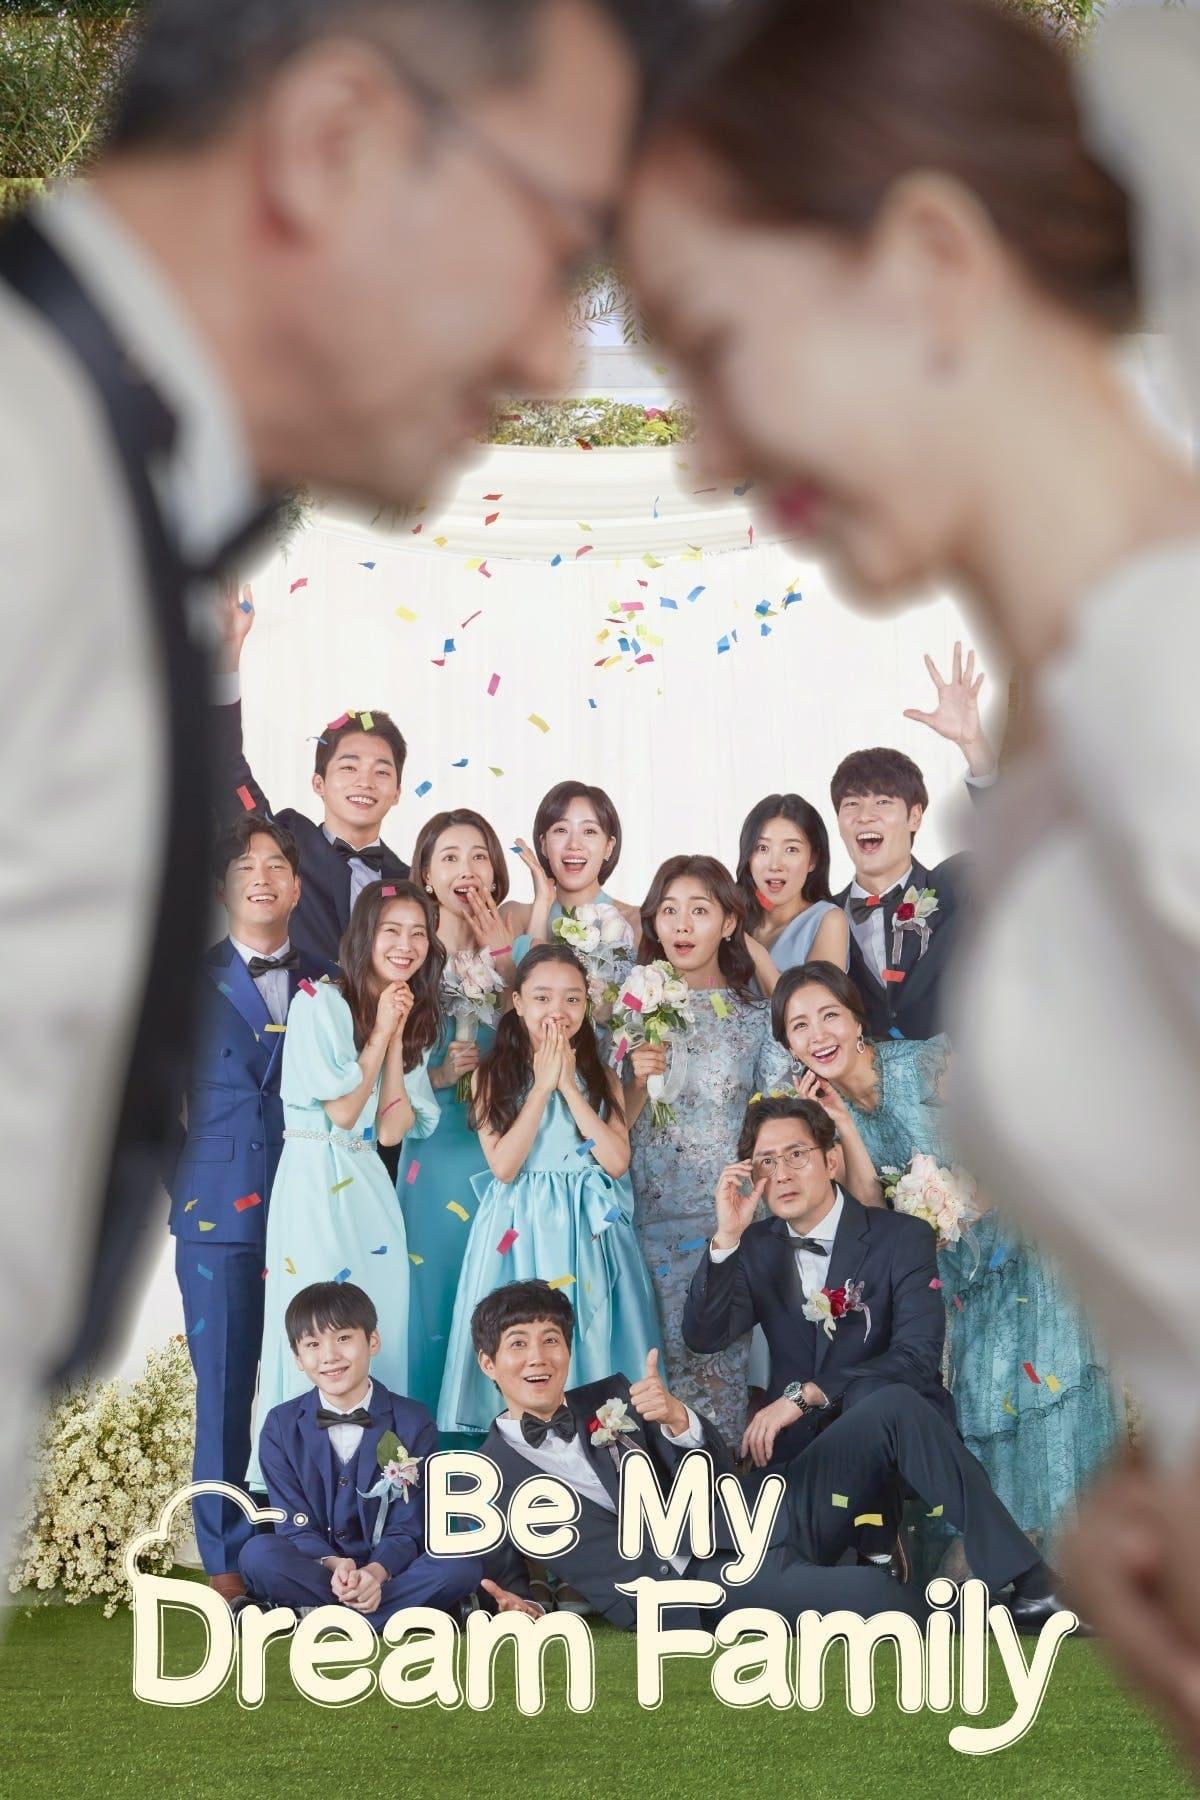 Be My Dream Family poster